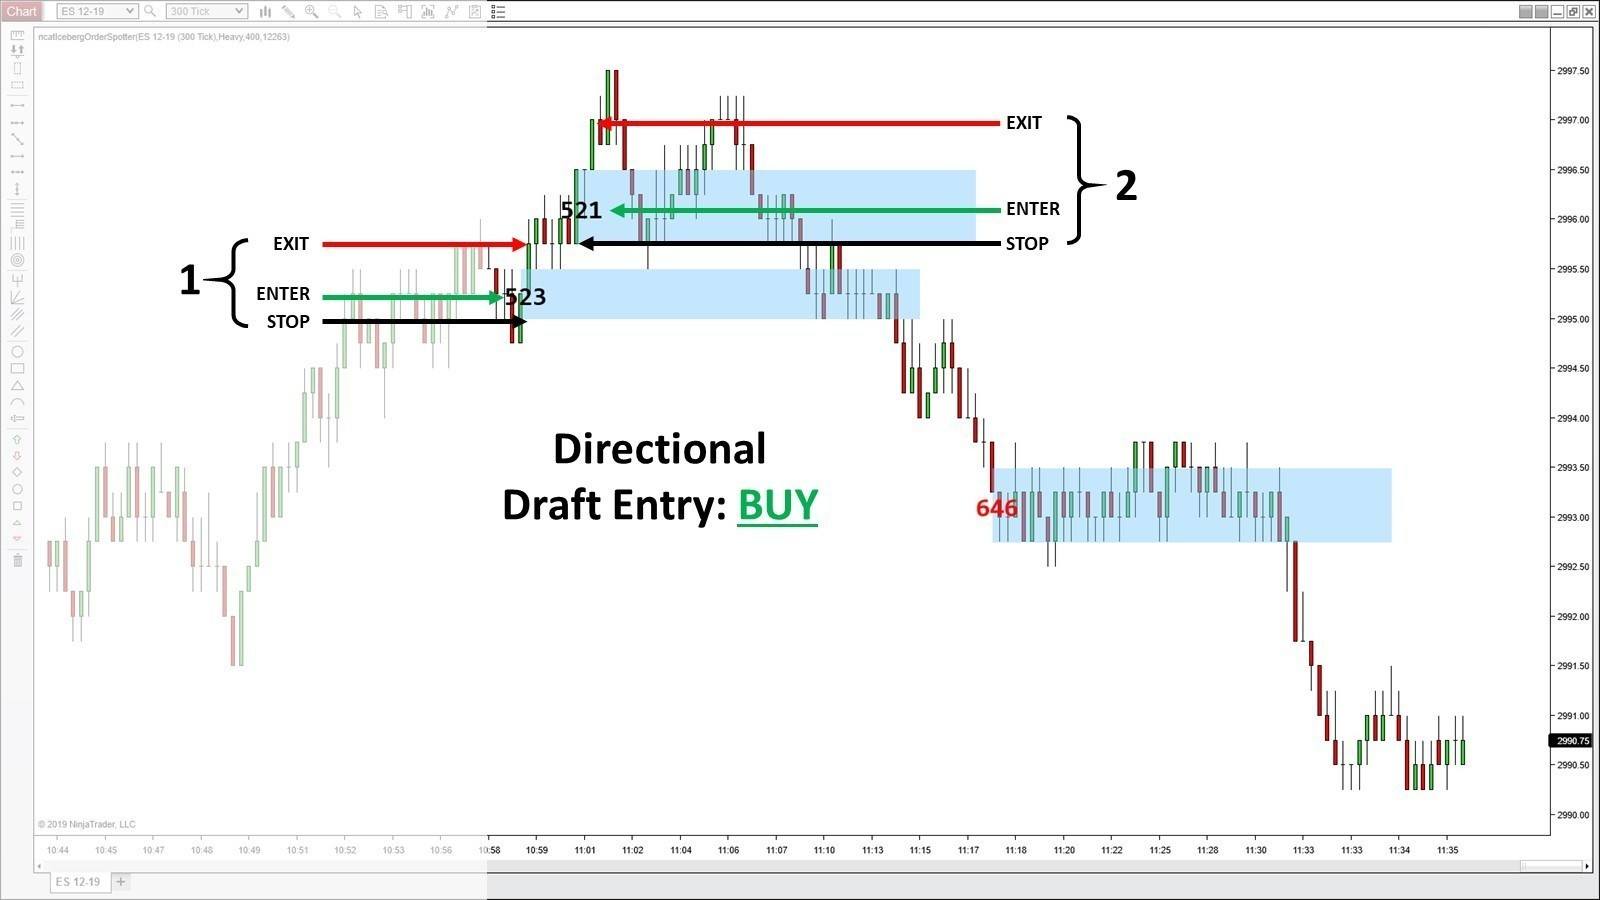 ES chart showing buy signals based on trading iceberg orders. Directional draft entry signals a buy.